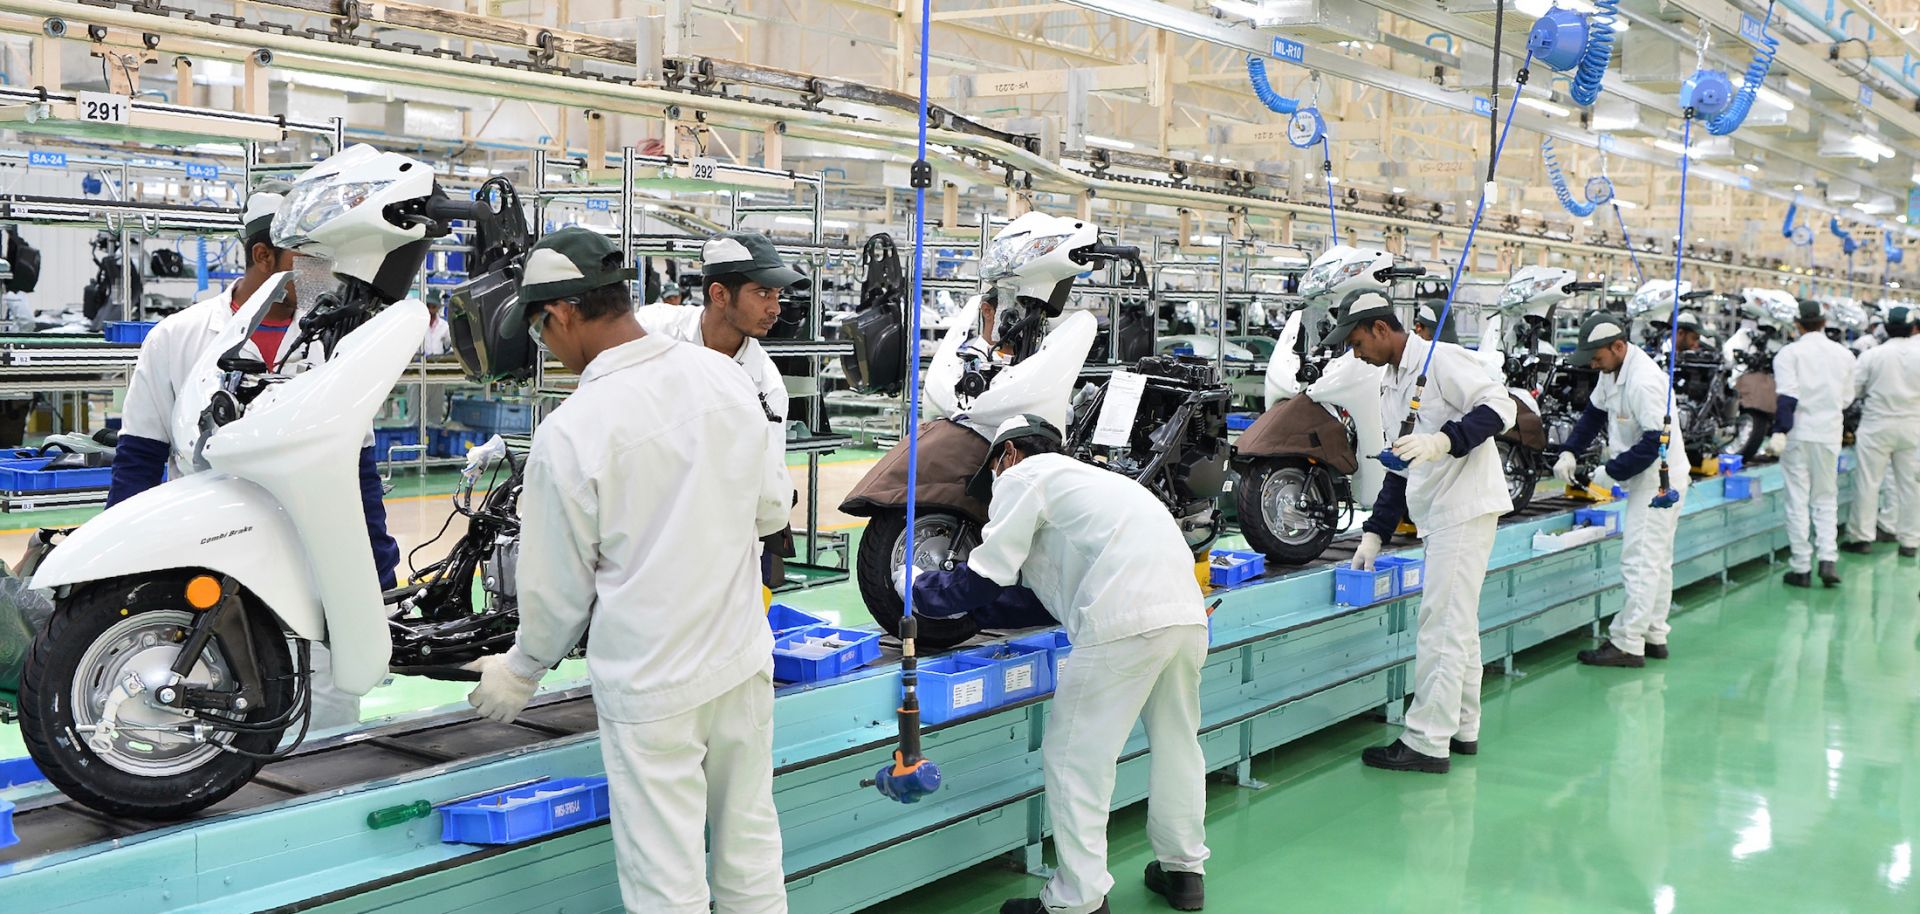 Employees assemble parts and make final inspections of Honda Activa scooters in Narasapura, on the outskirts of Bangalore, India. 